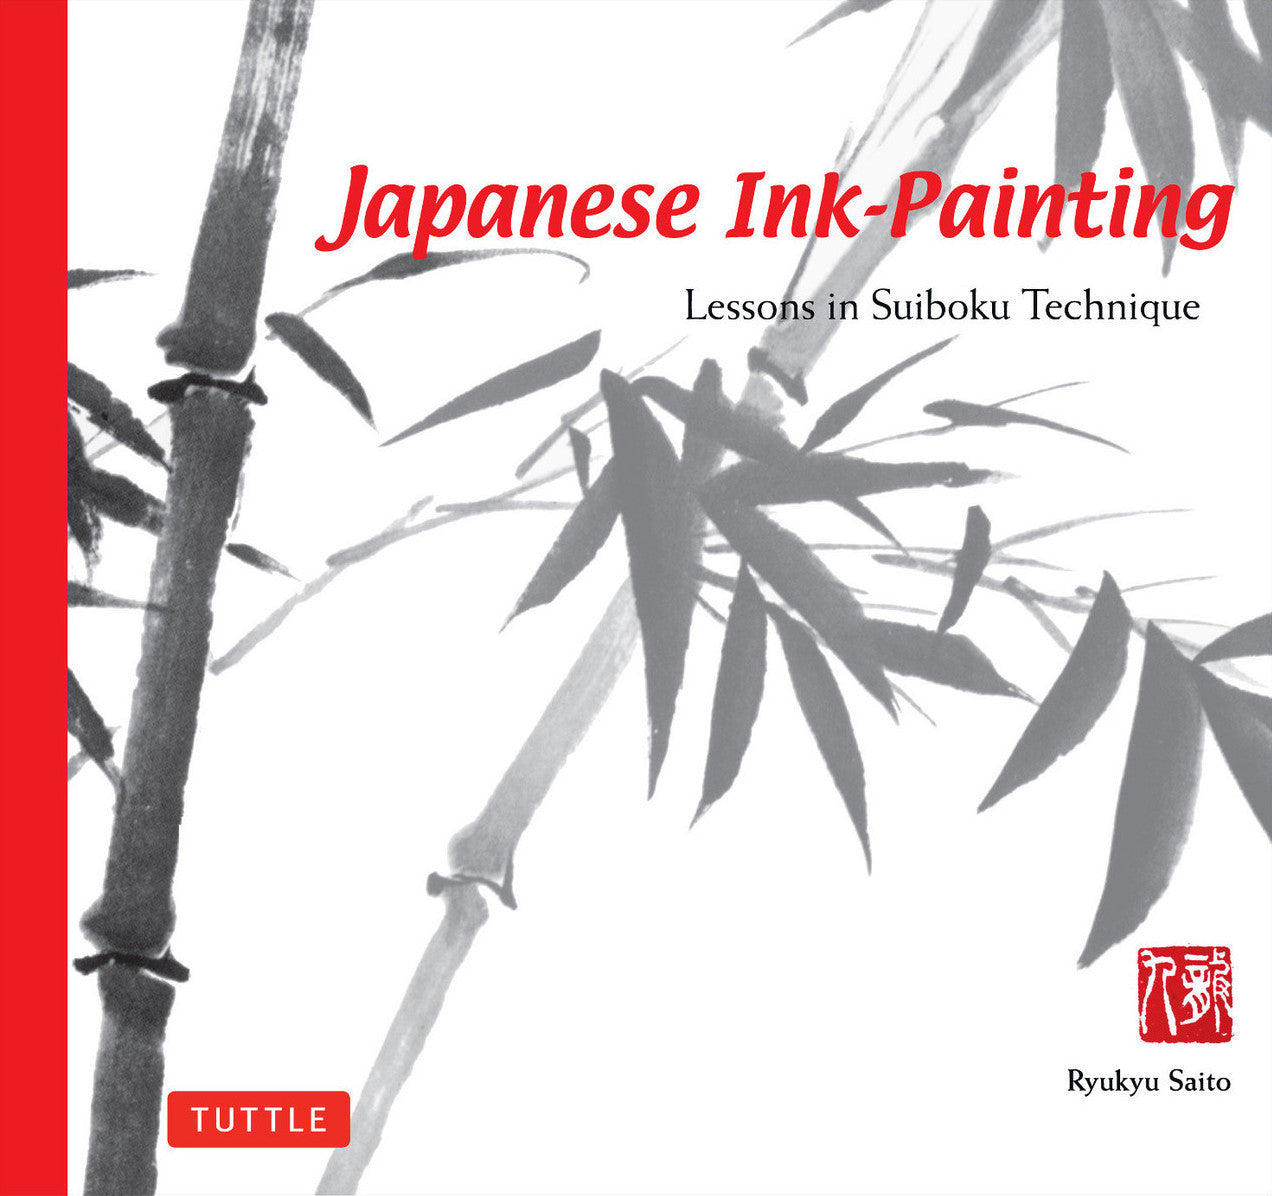 Japanese Ink-Painting